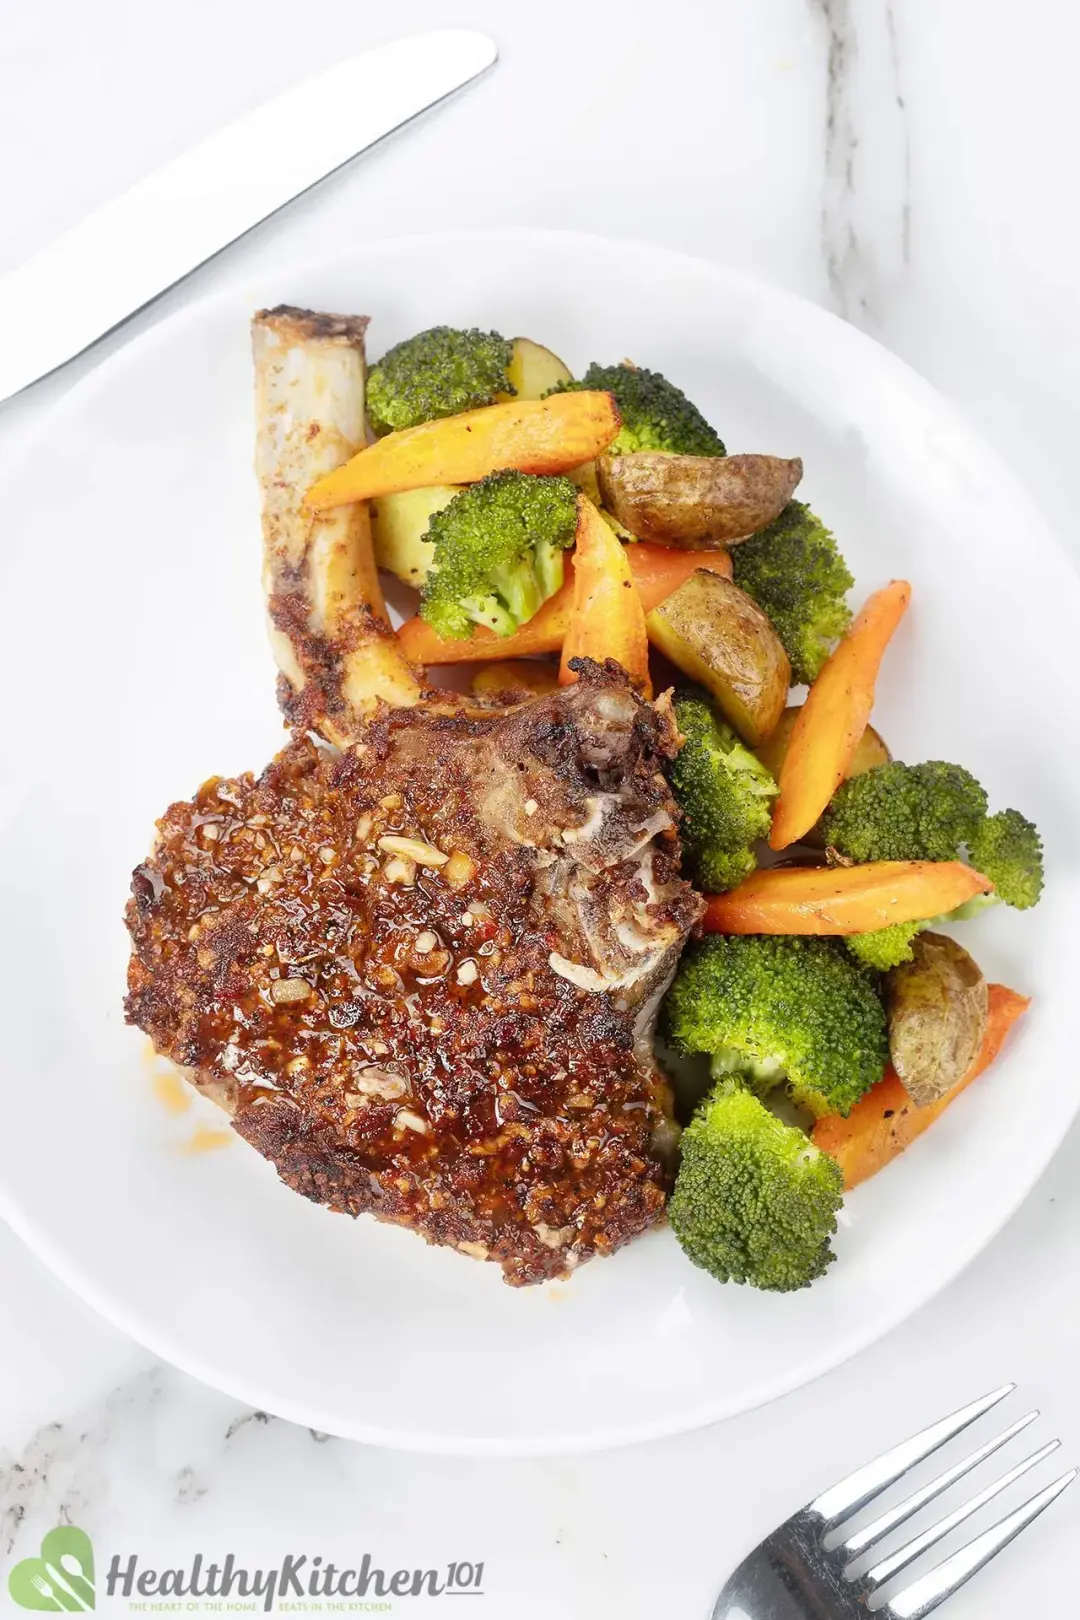 A plate of a golden pork cutlet served with cooked broccoli and carrot slices